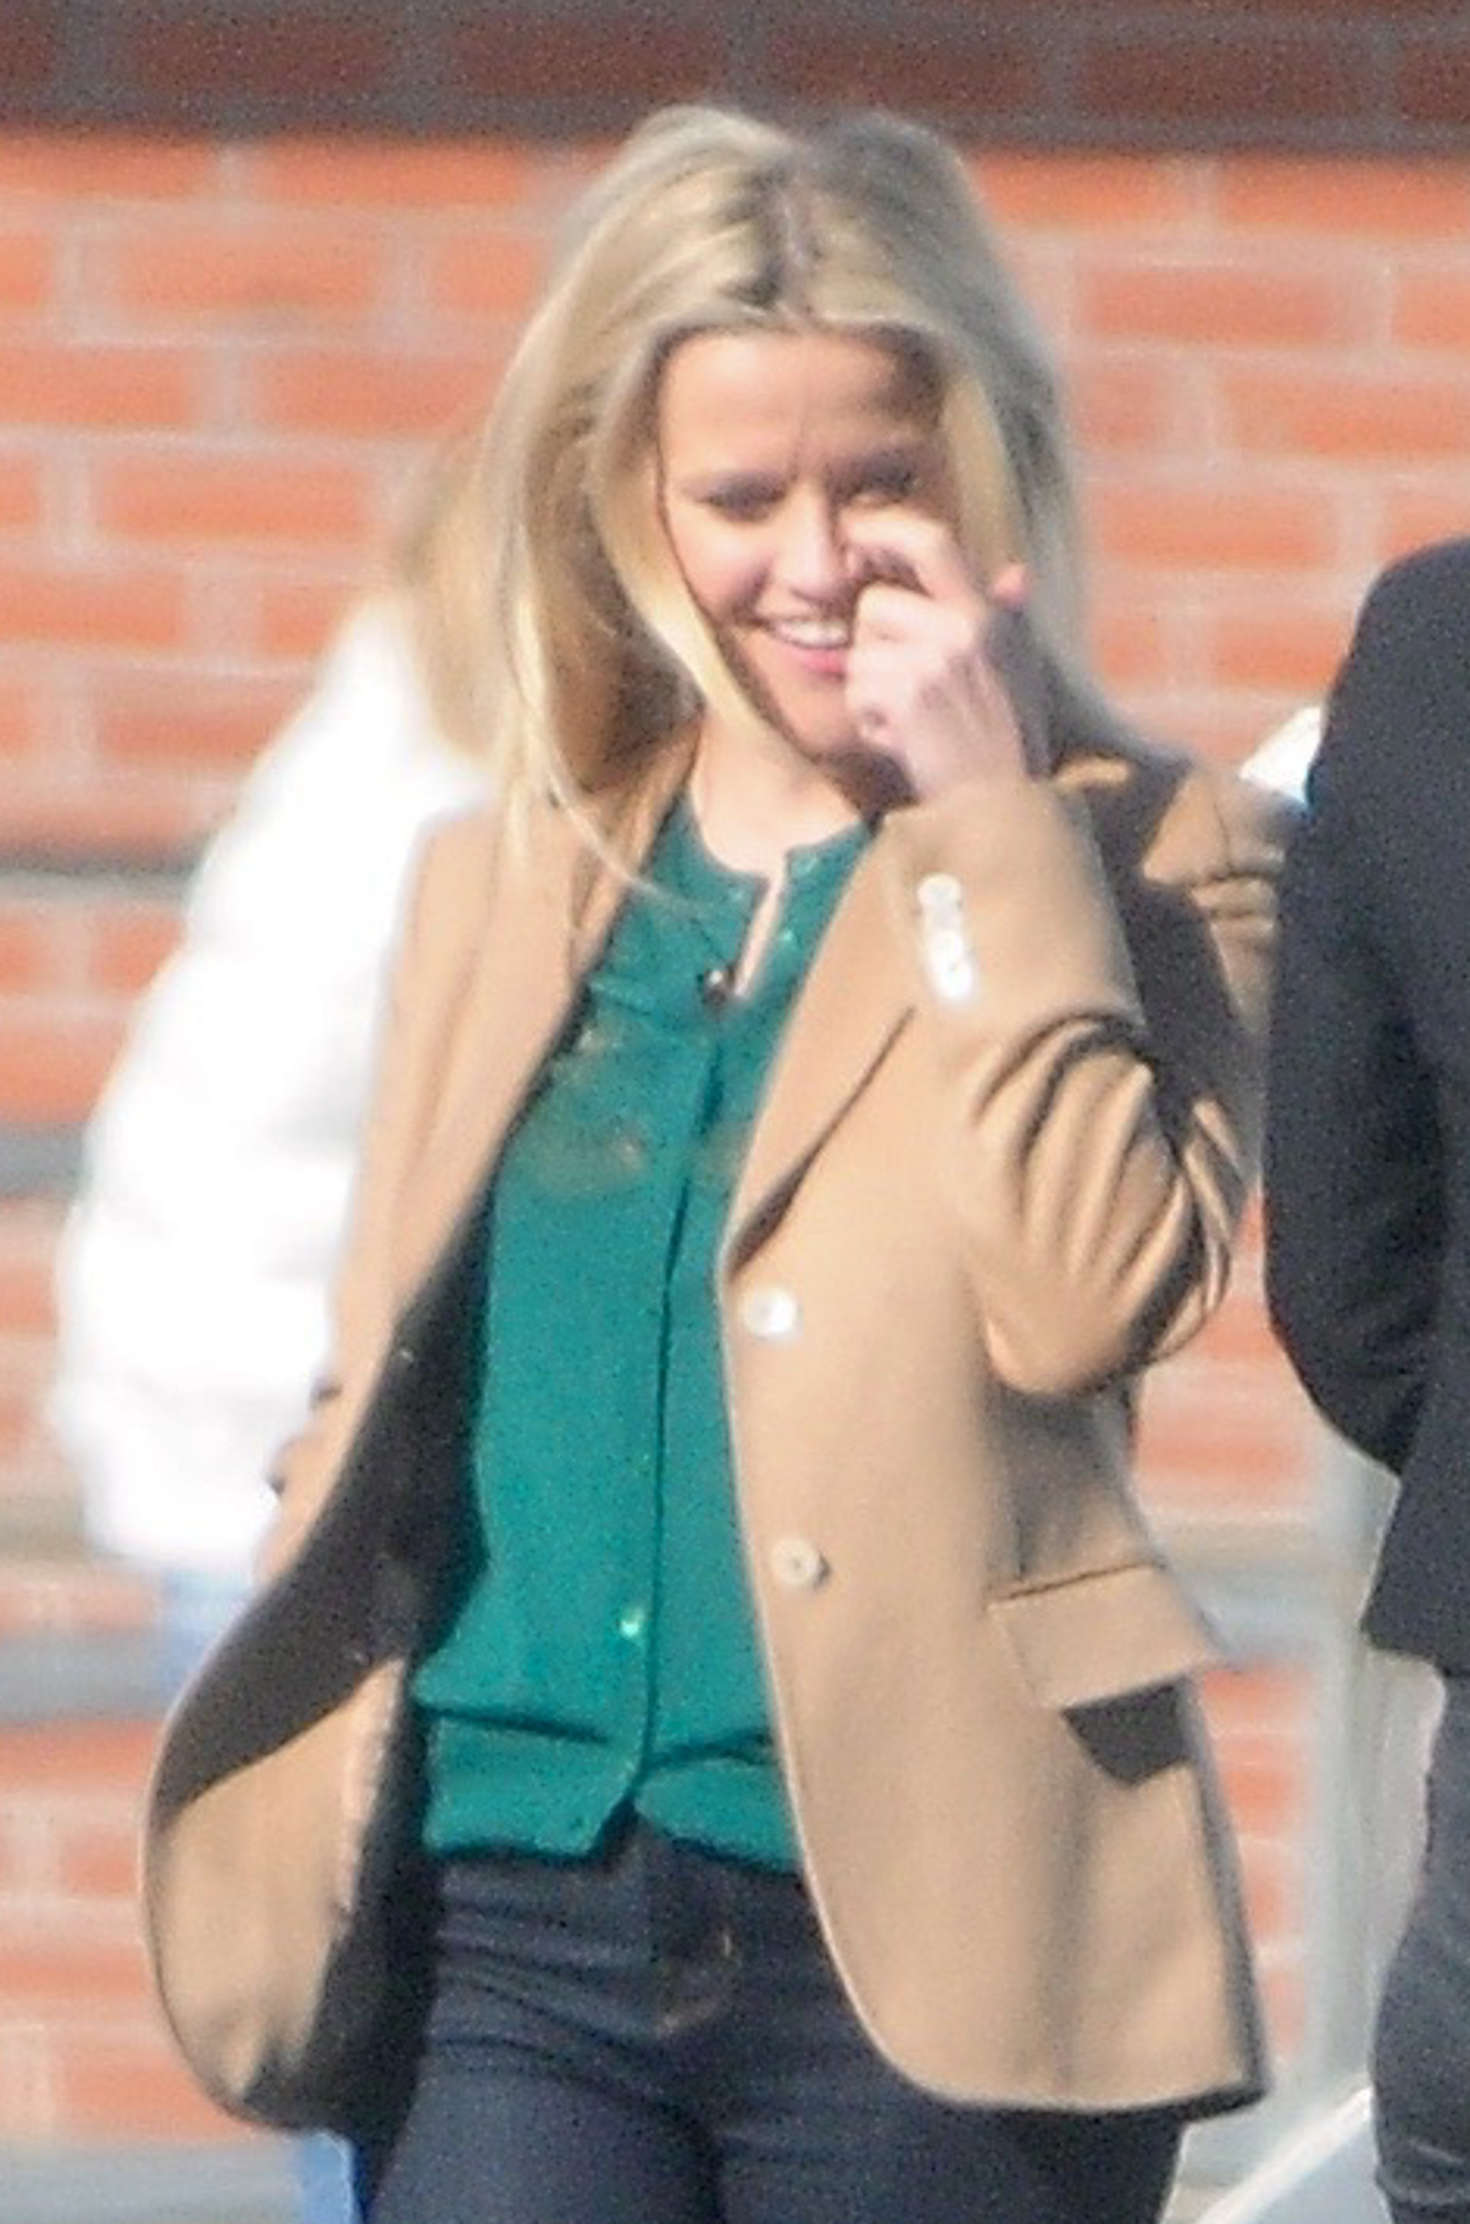 Reese Witherspoon â€“ On The Set Of â€˜Big Little Liesâ€™ In Los Angeles